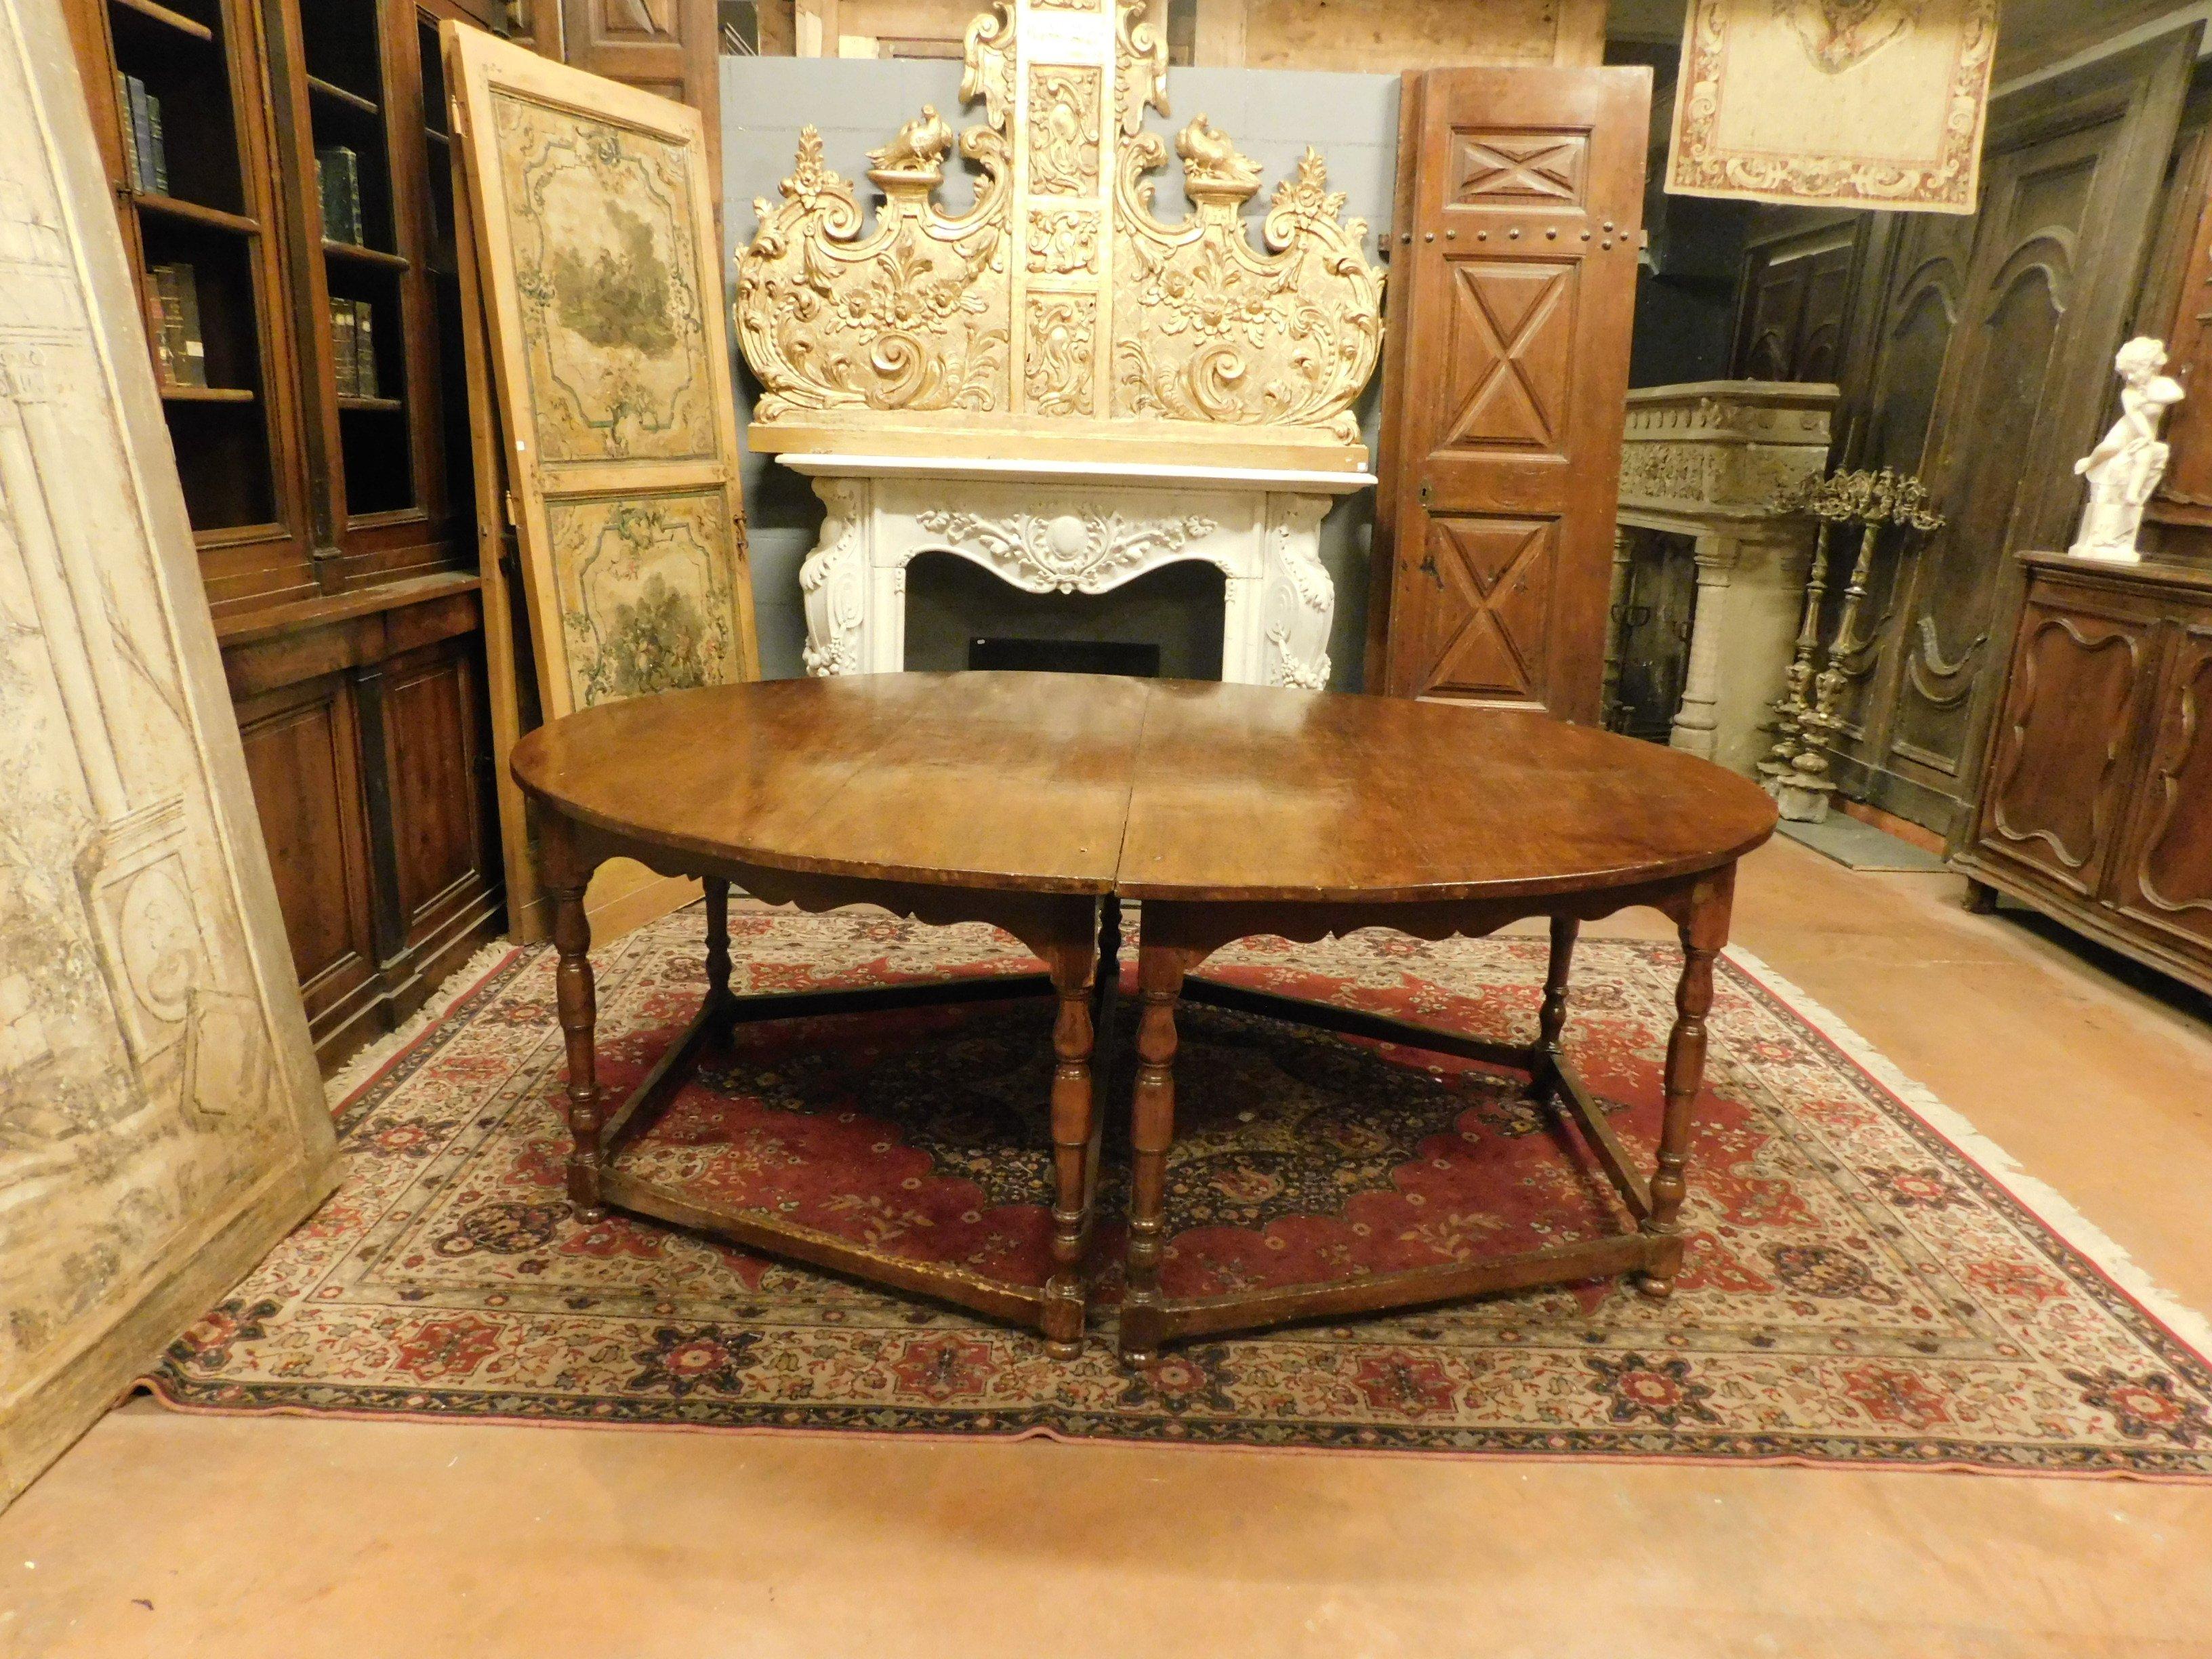 Antique Oval Table in Beechwood, Divisible 2 Half-Moons with 8 Legs, 1600, Italy For Sale 3